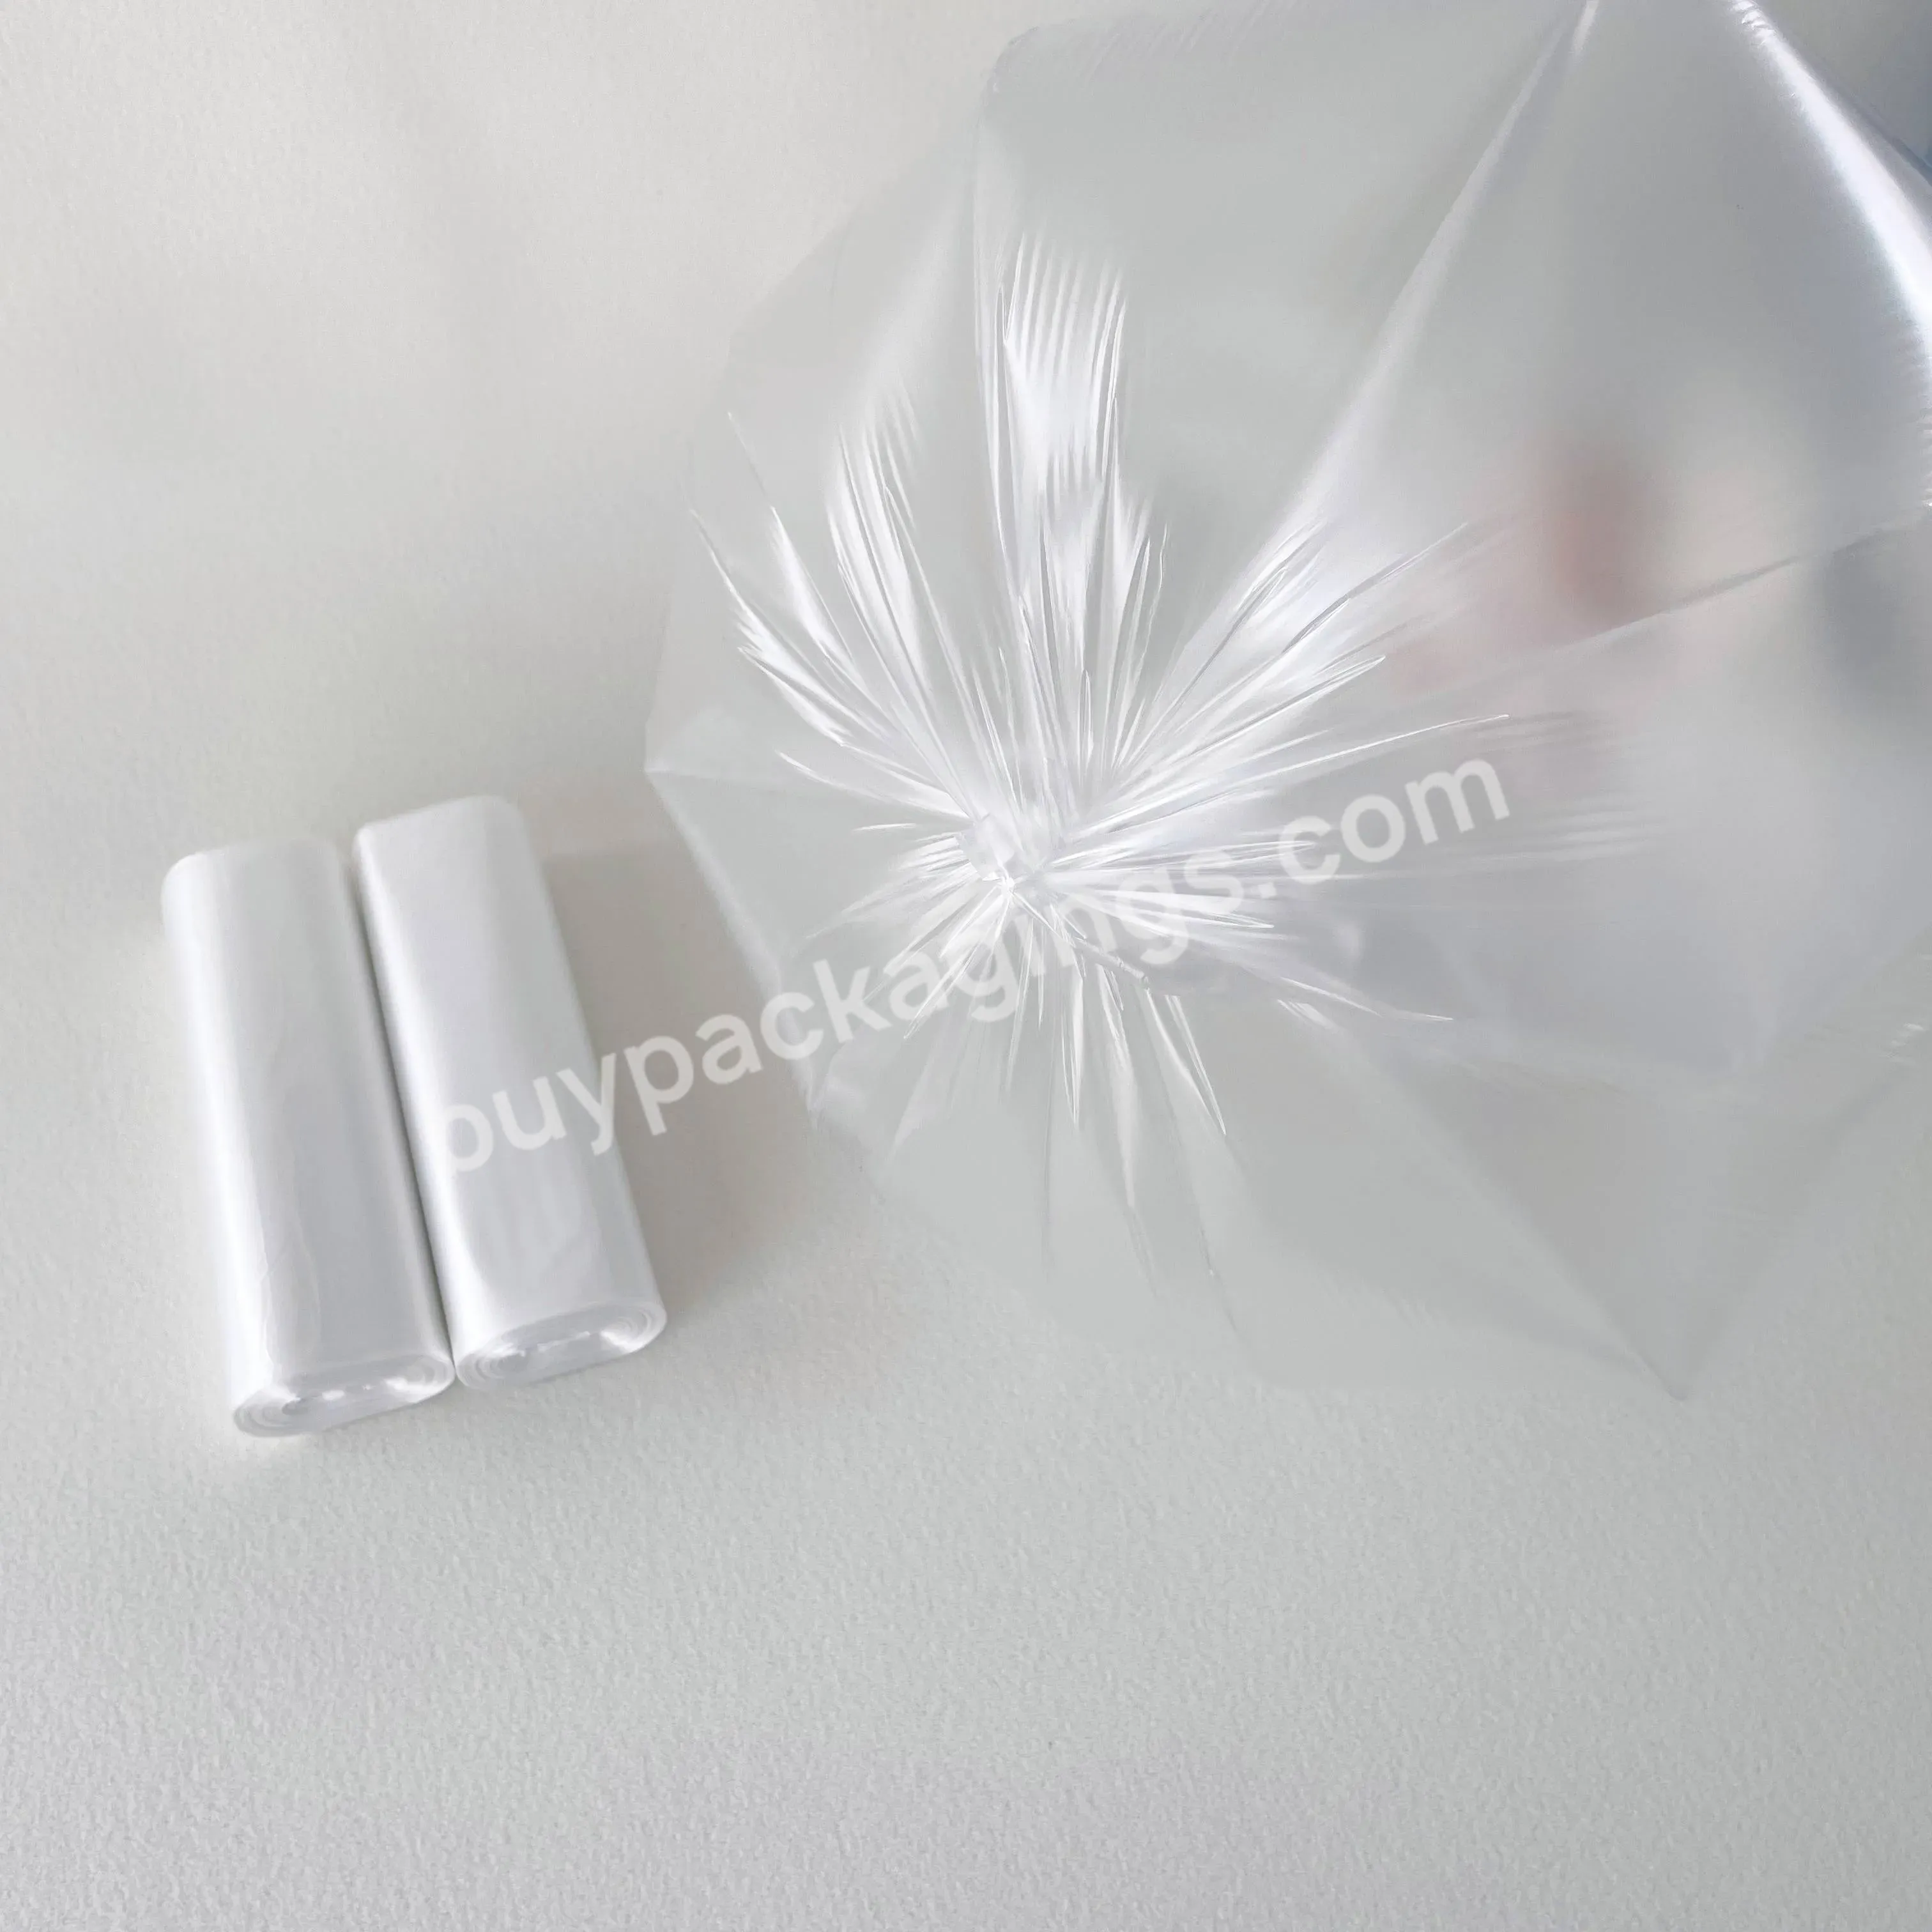 33gallon Clear Recycling Plastic Garbage Trash Bag Heavy Duty Plastic Trash Garbage Can Liner Bag - Buy Gallon Clear Recycling Plastic Garbage Trash Bag,Heavy Duty Plastic Trash Garbage Can Liner Bag,Compostable Plastic Garbage Bags On Roll.